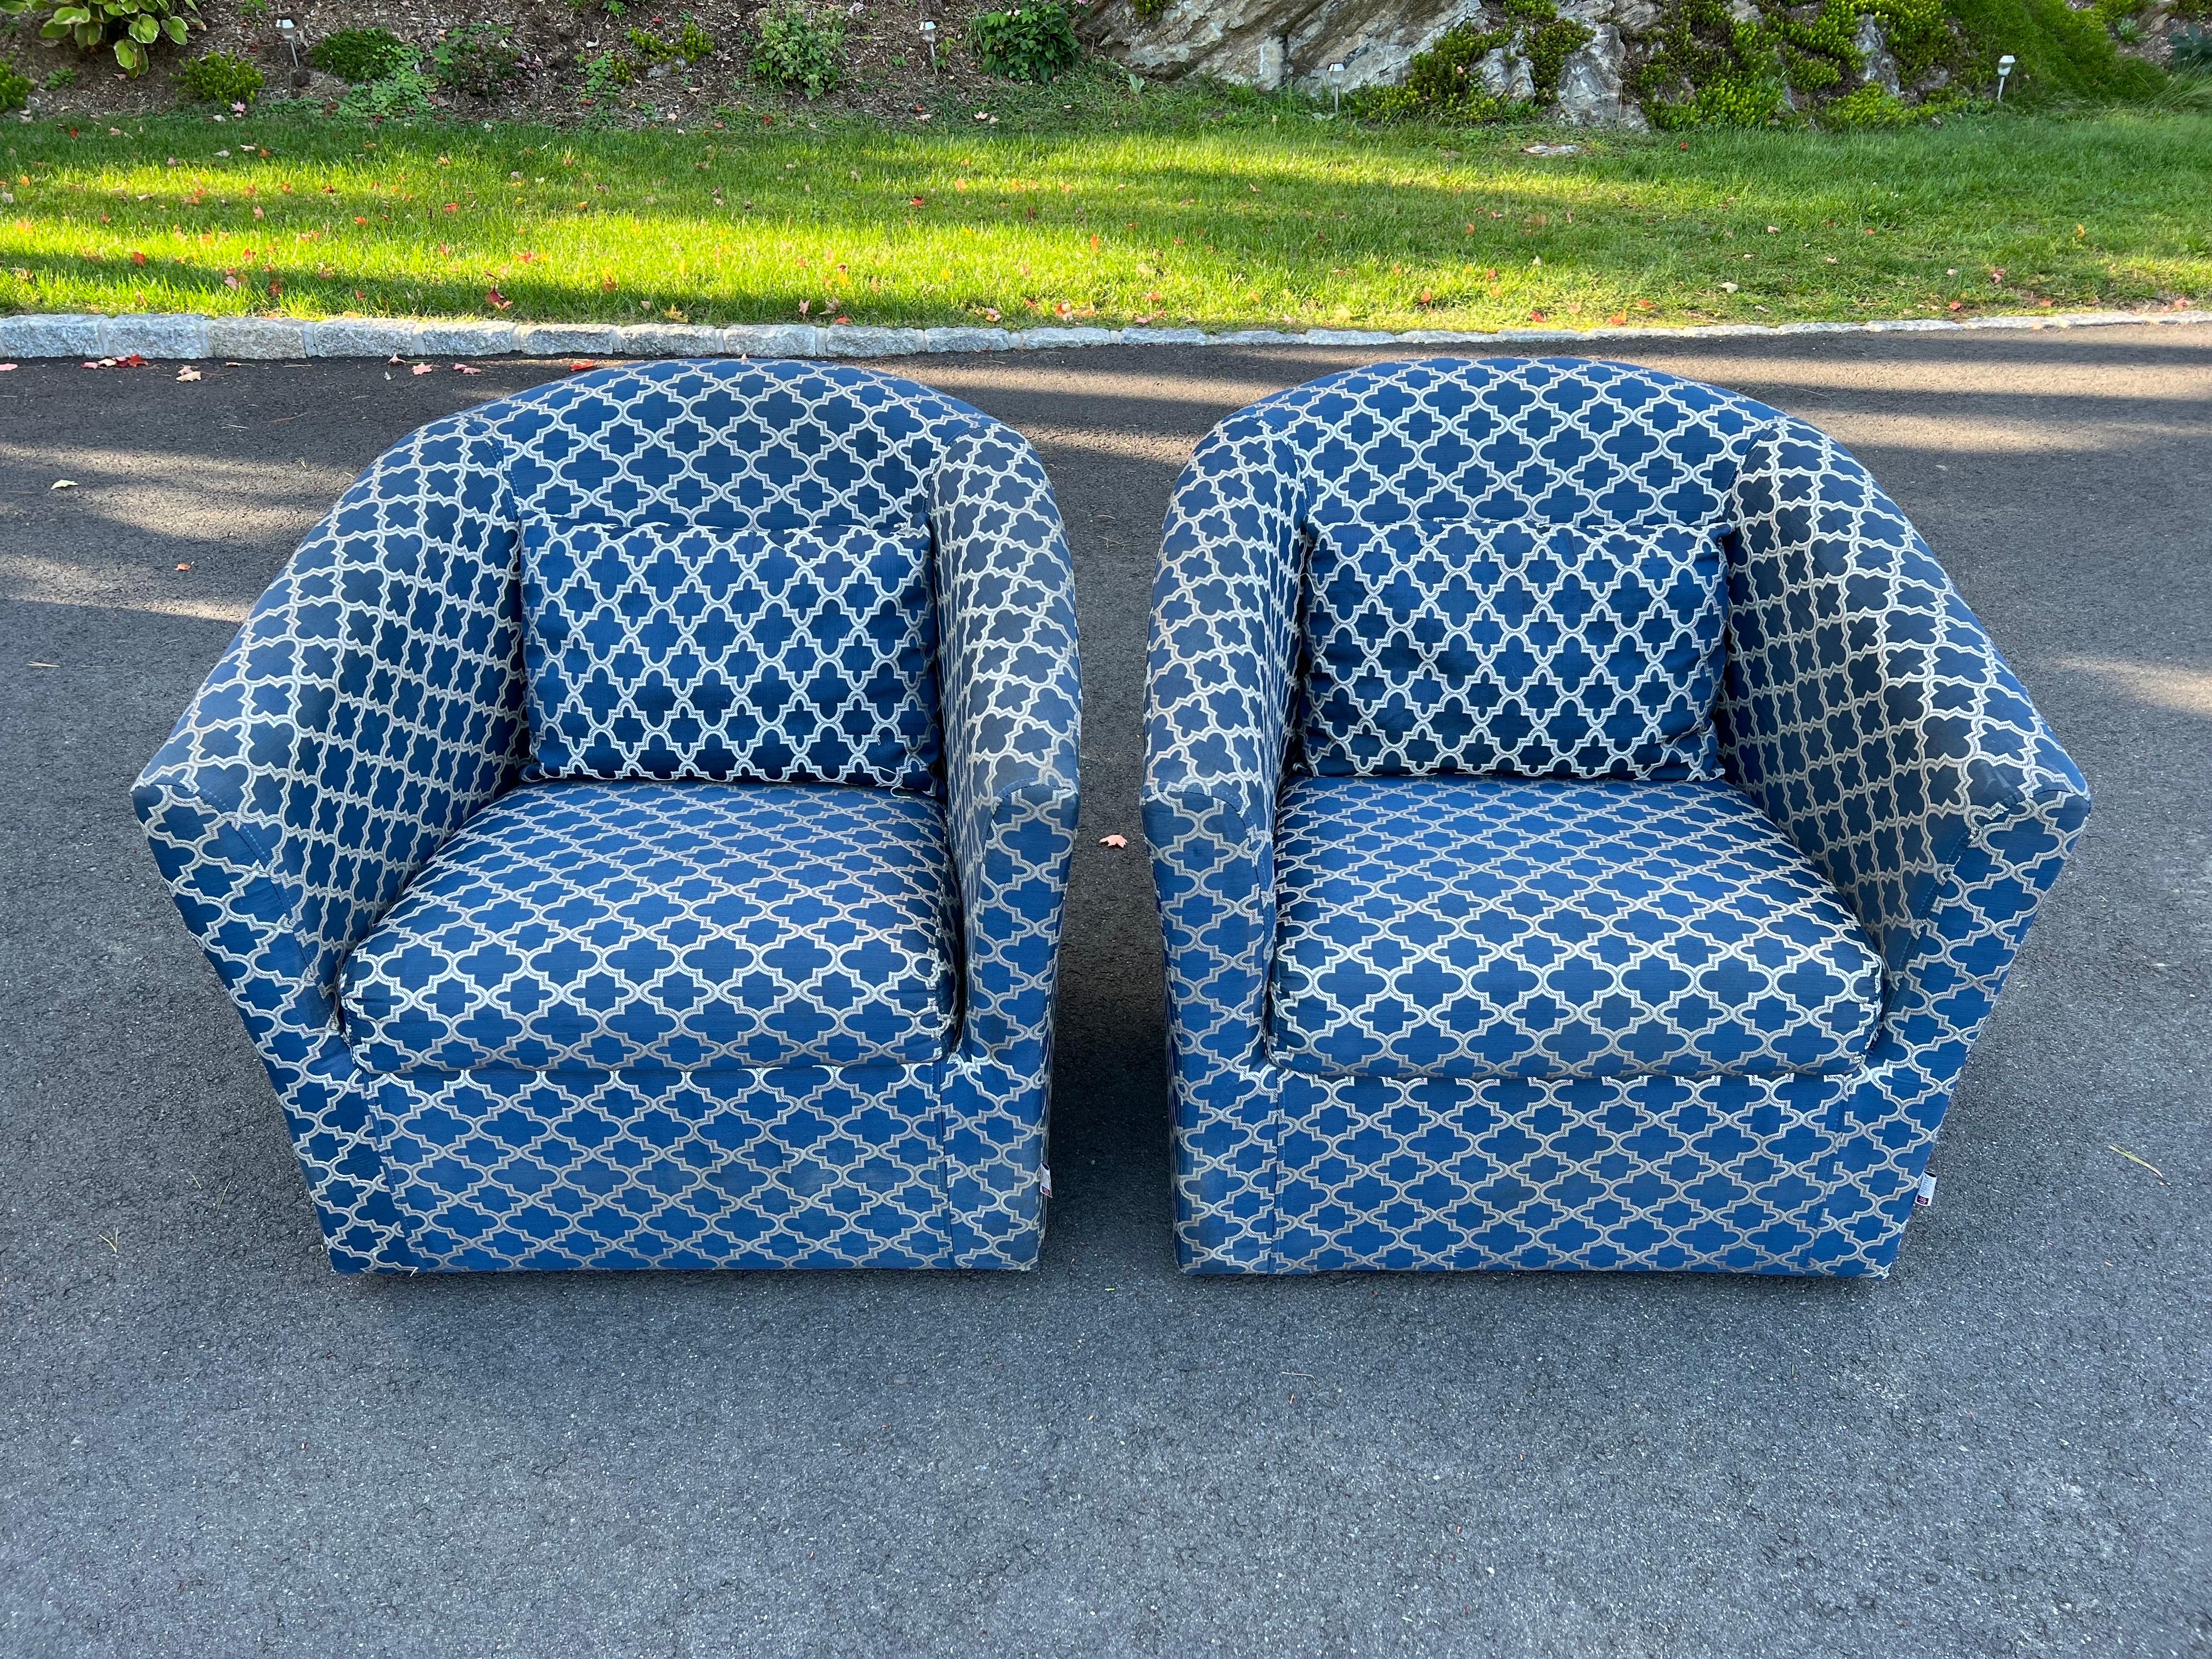 Pair of Hollywood Regency Swivel club chairs. Nice geomtric pattern in blue and white / silver. Nice oversized scale cube chairs. Contemporaty design but Mid century feel.